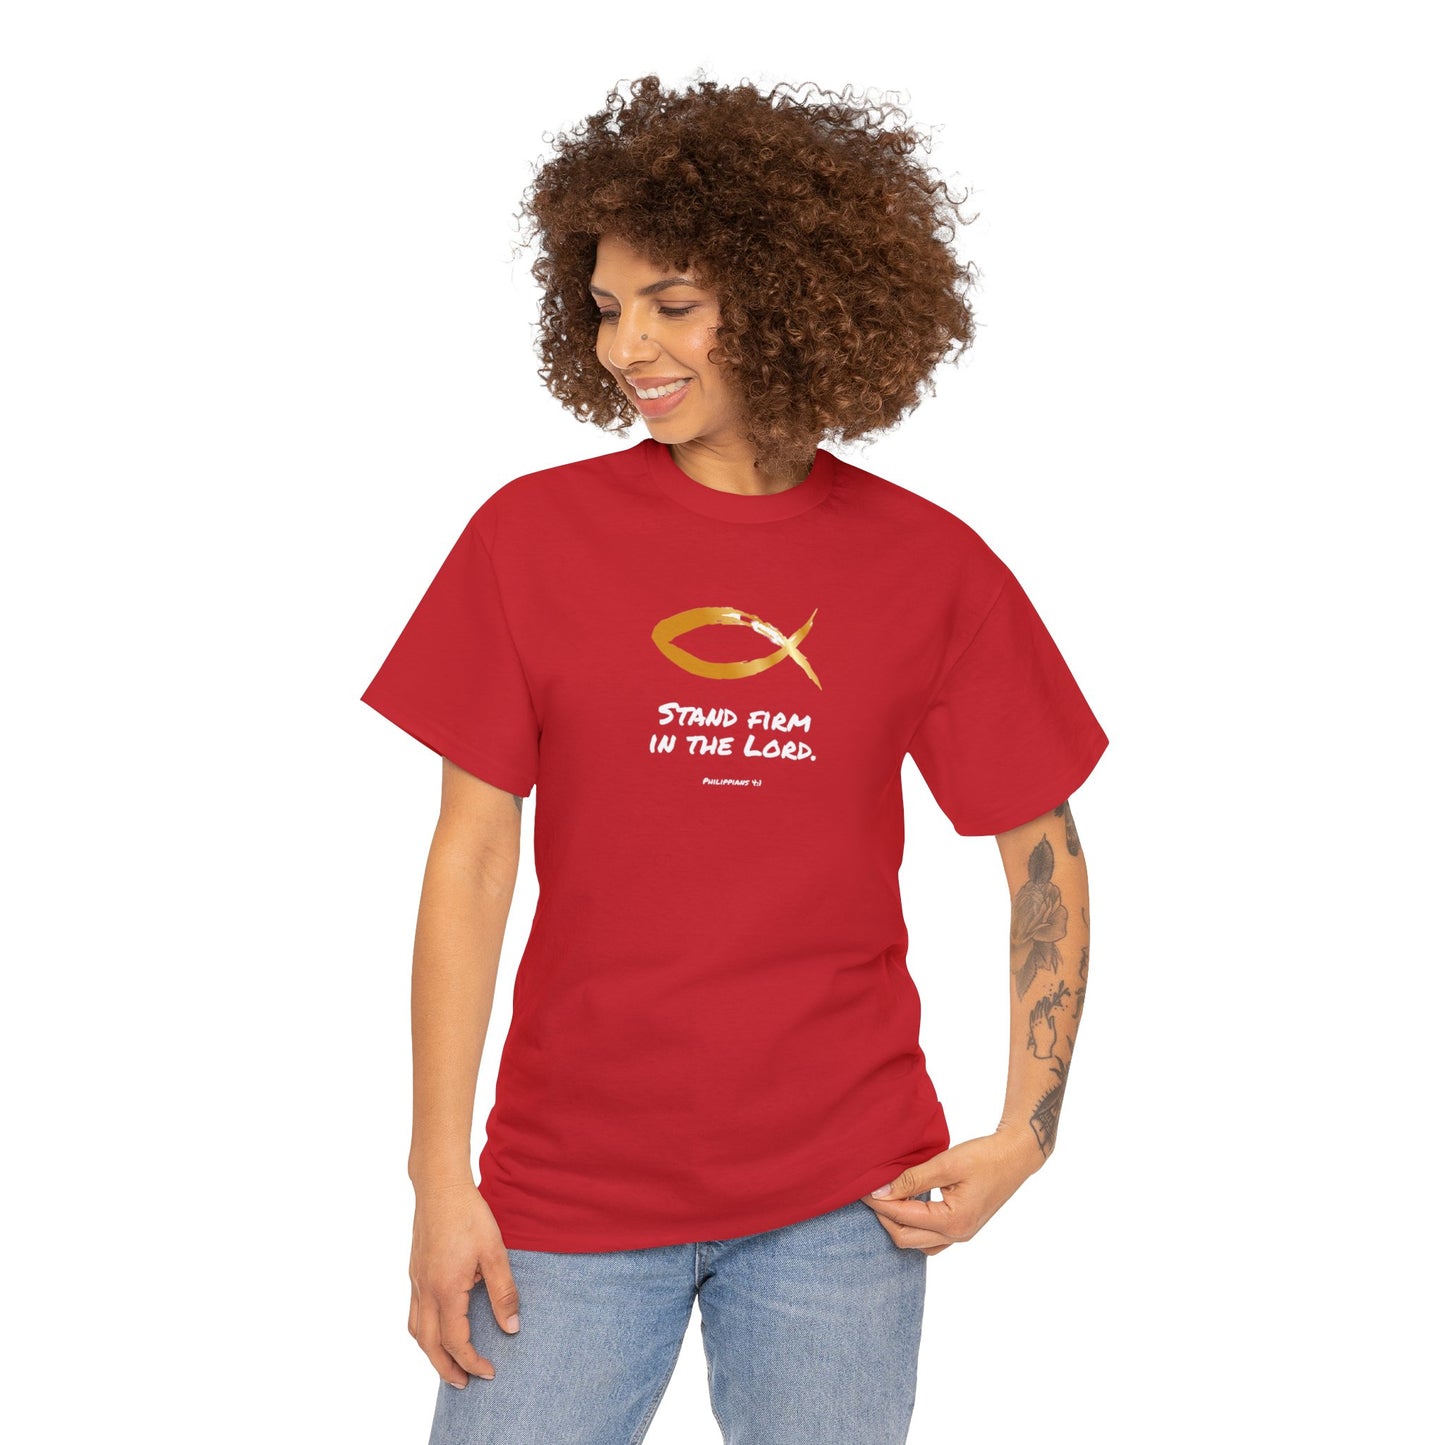 Unisex Heavy Cotton Tee - Stand Firm in the Lord